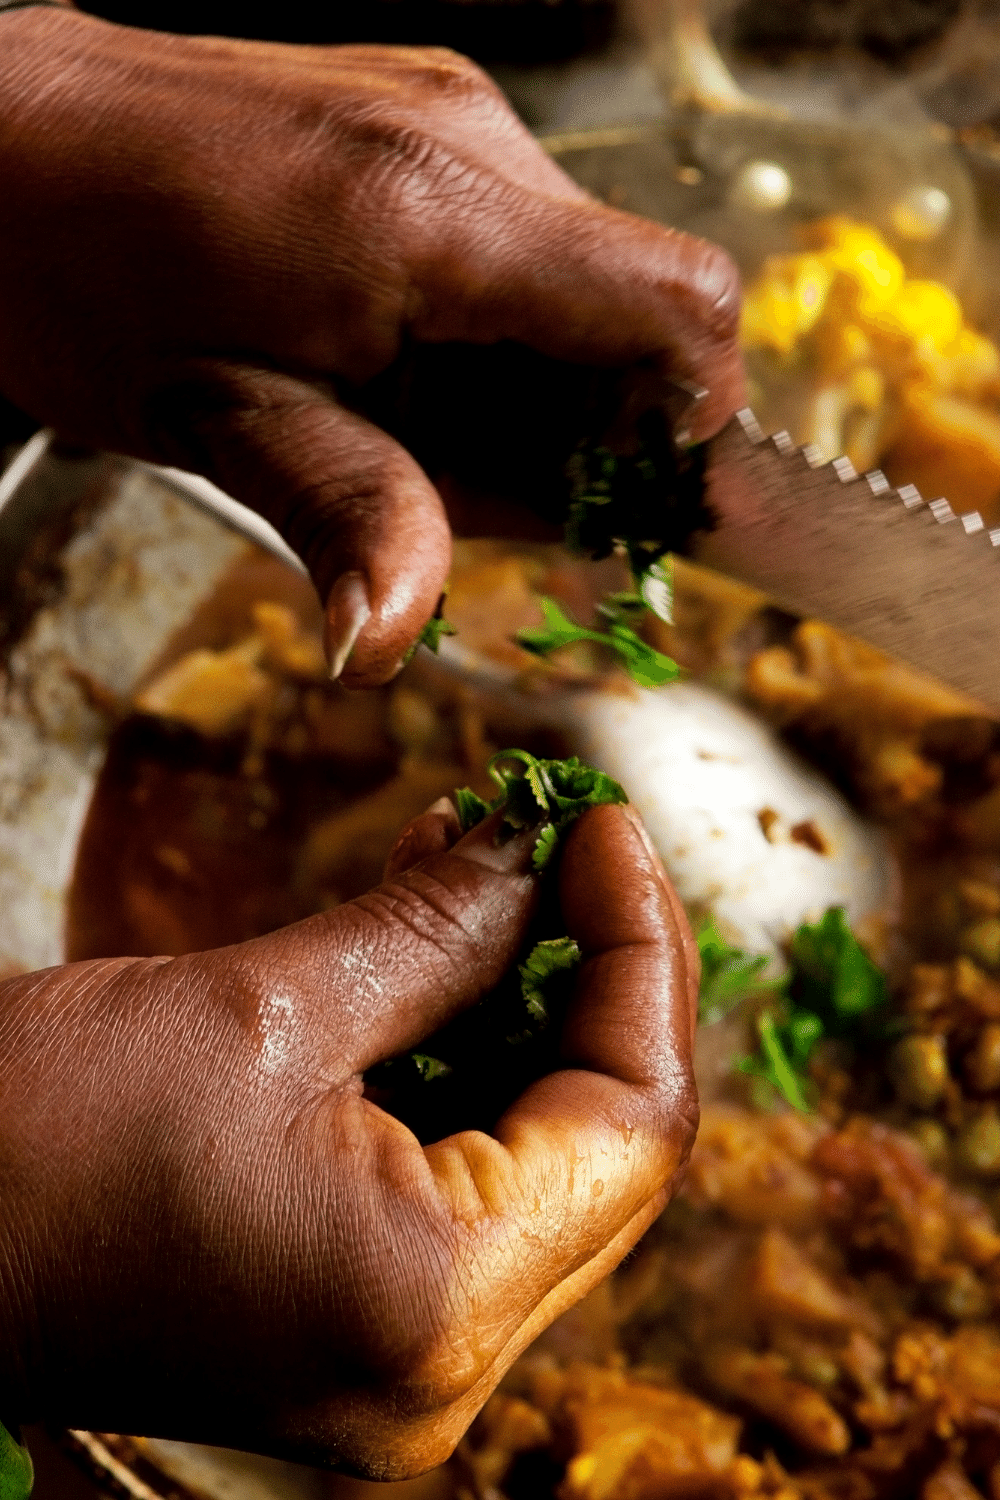 hands dicing a vegetable into a pot for cooking